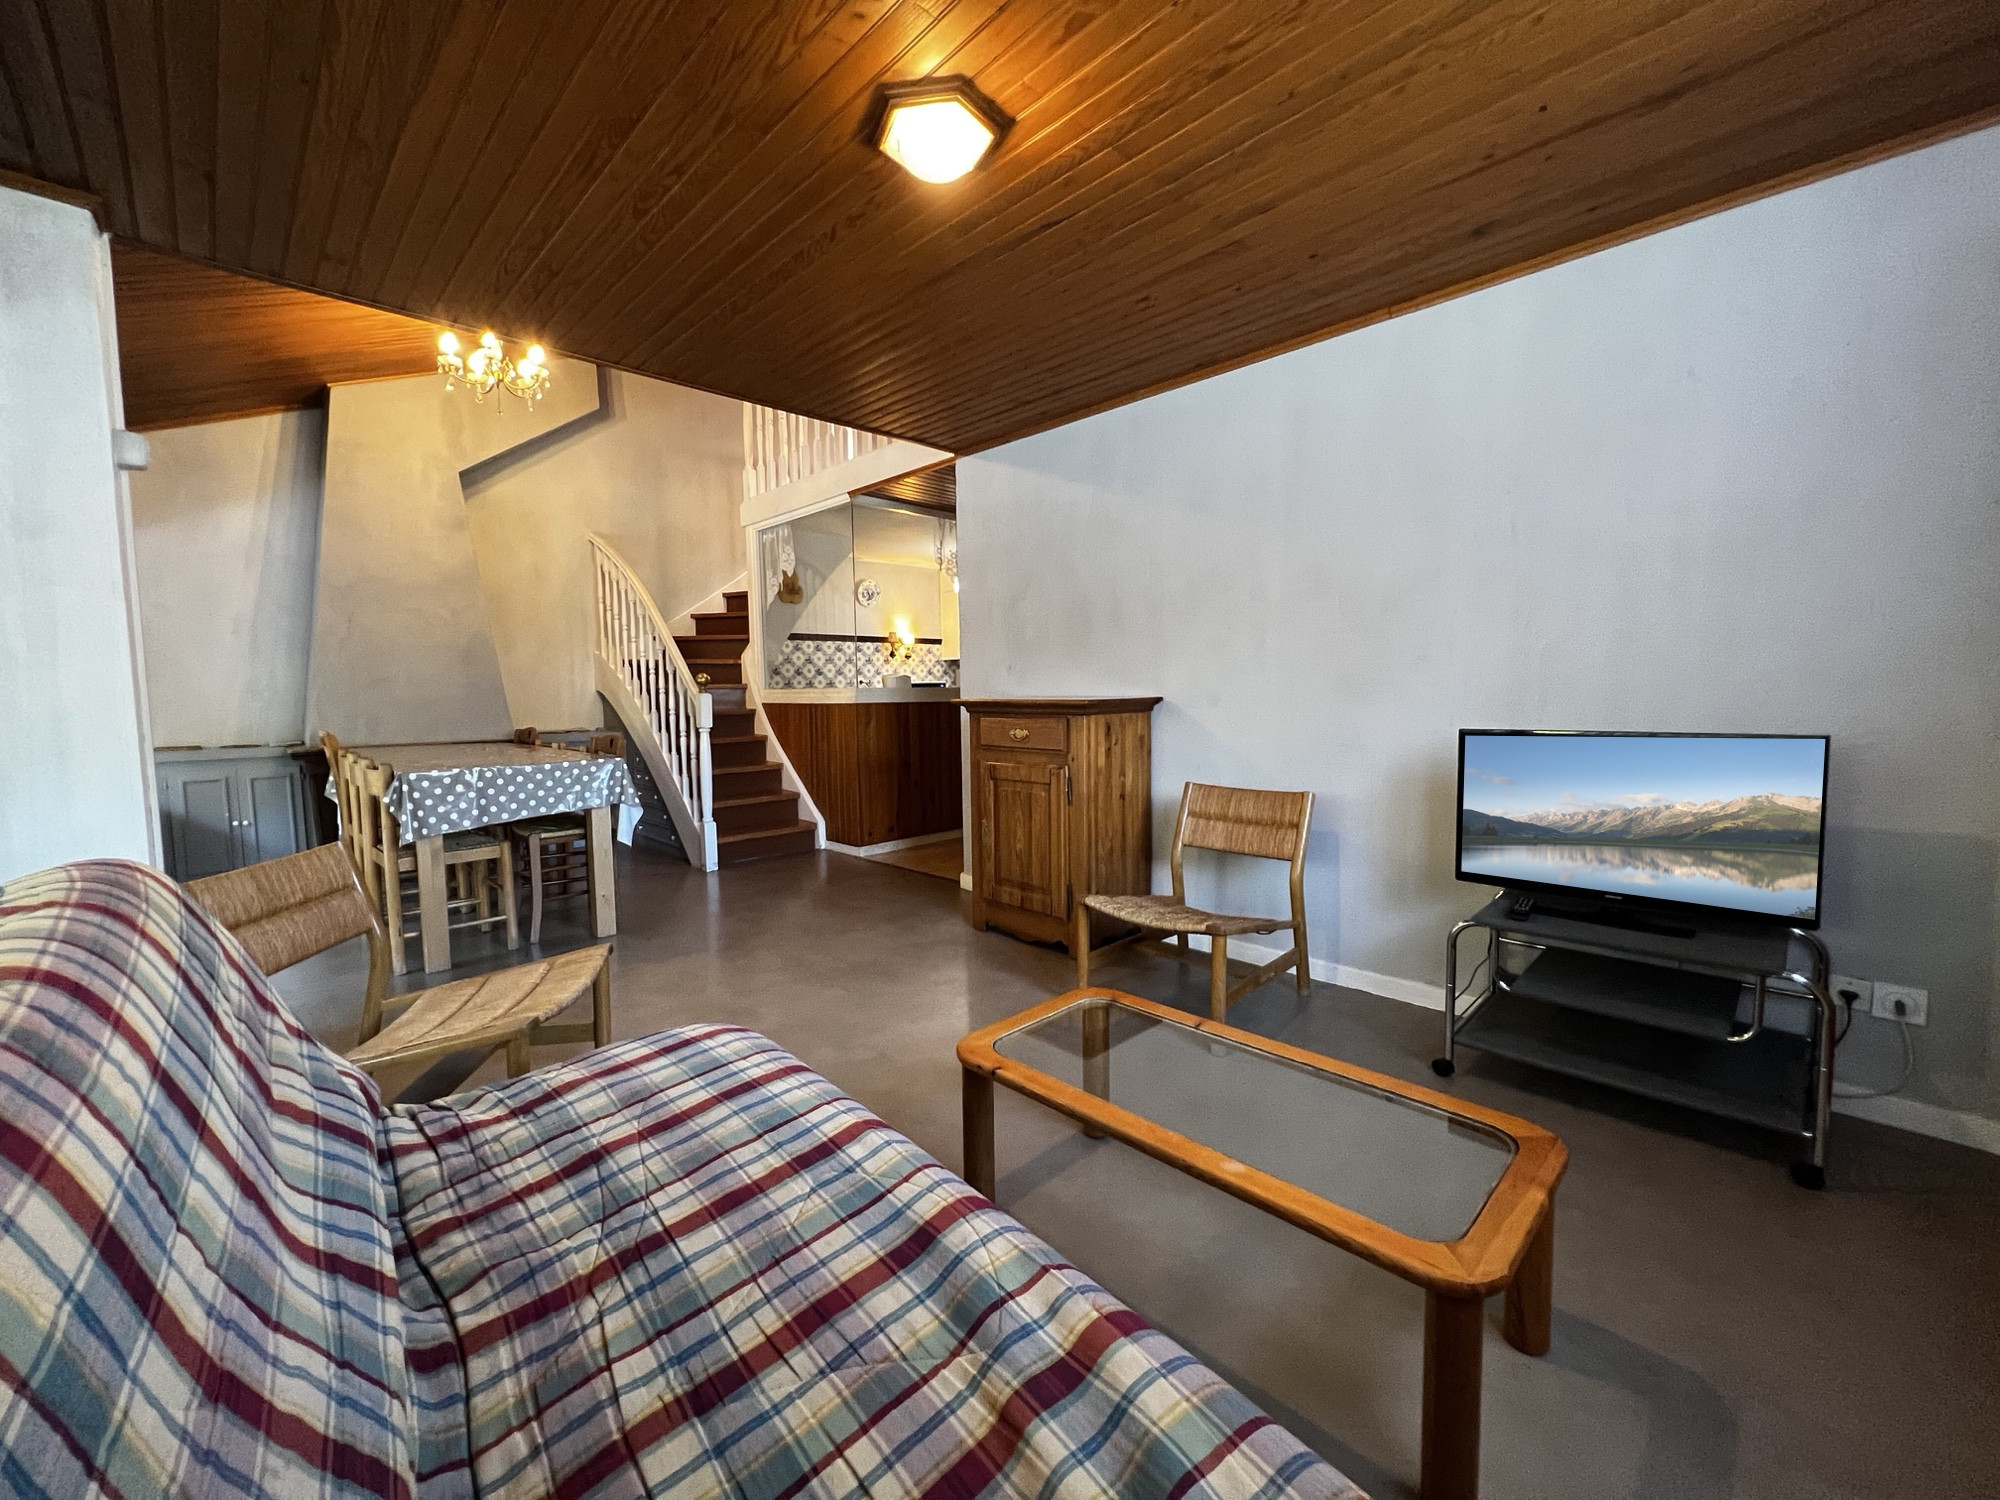  in La Clusaz - Belmont, apartment 26 - for 8 people 2* in the village